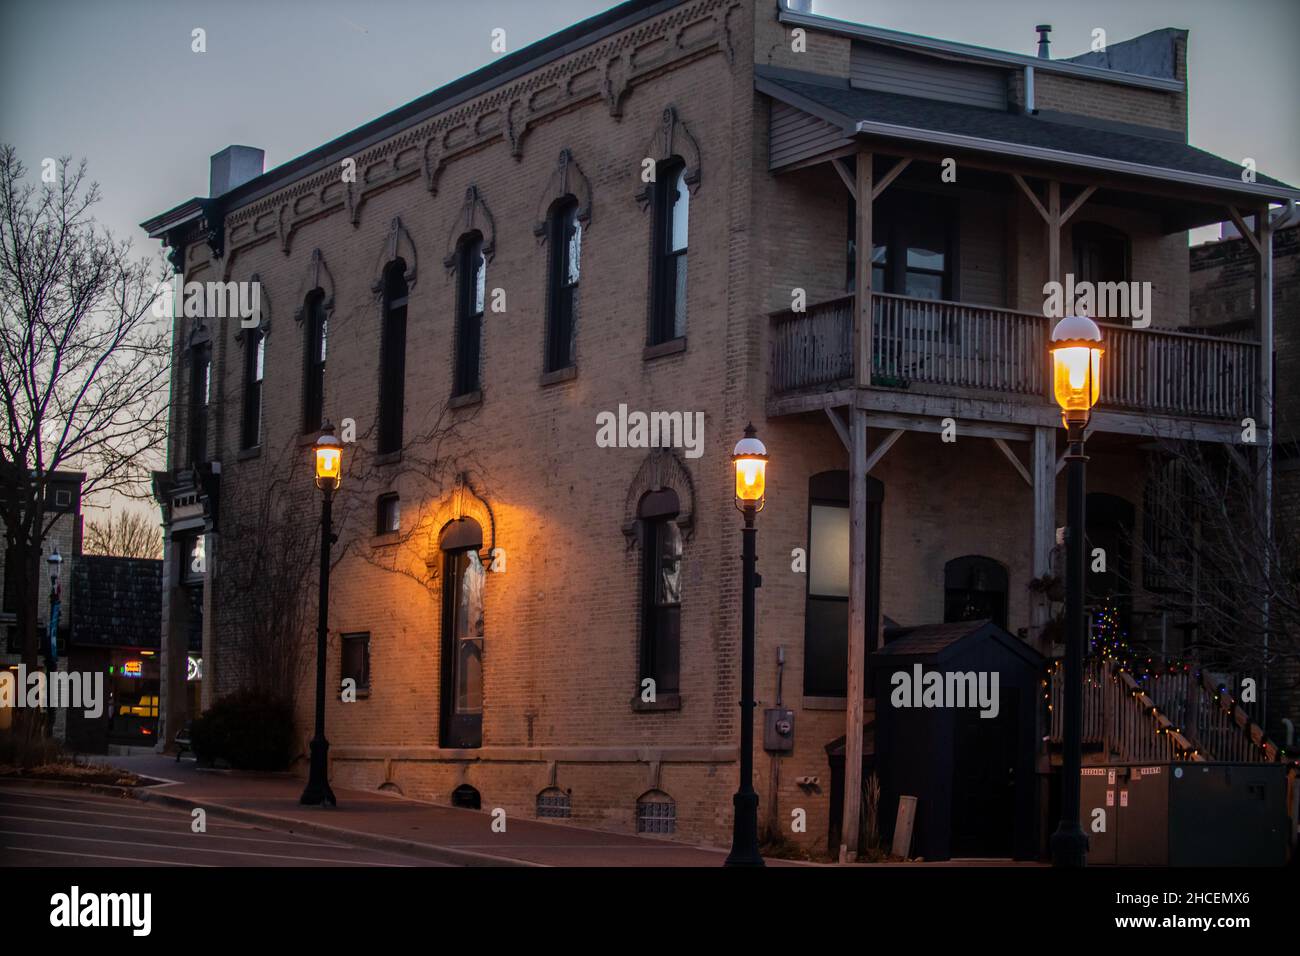 Facade of the brown building in the evening illuminated by street lamps. Stock Photo